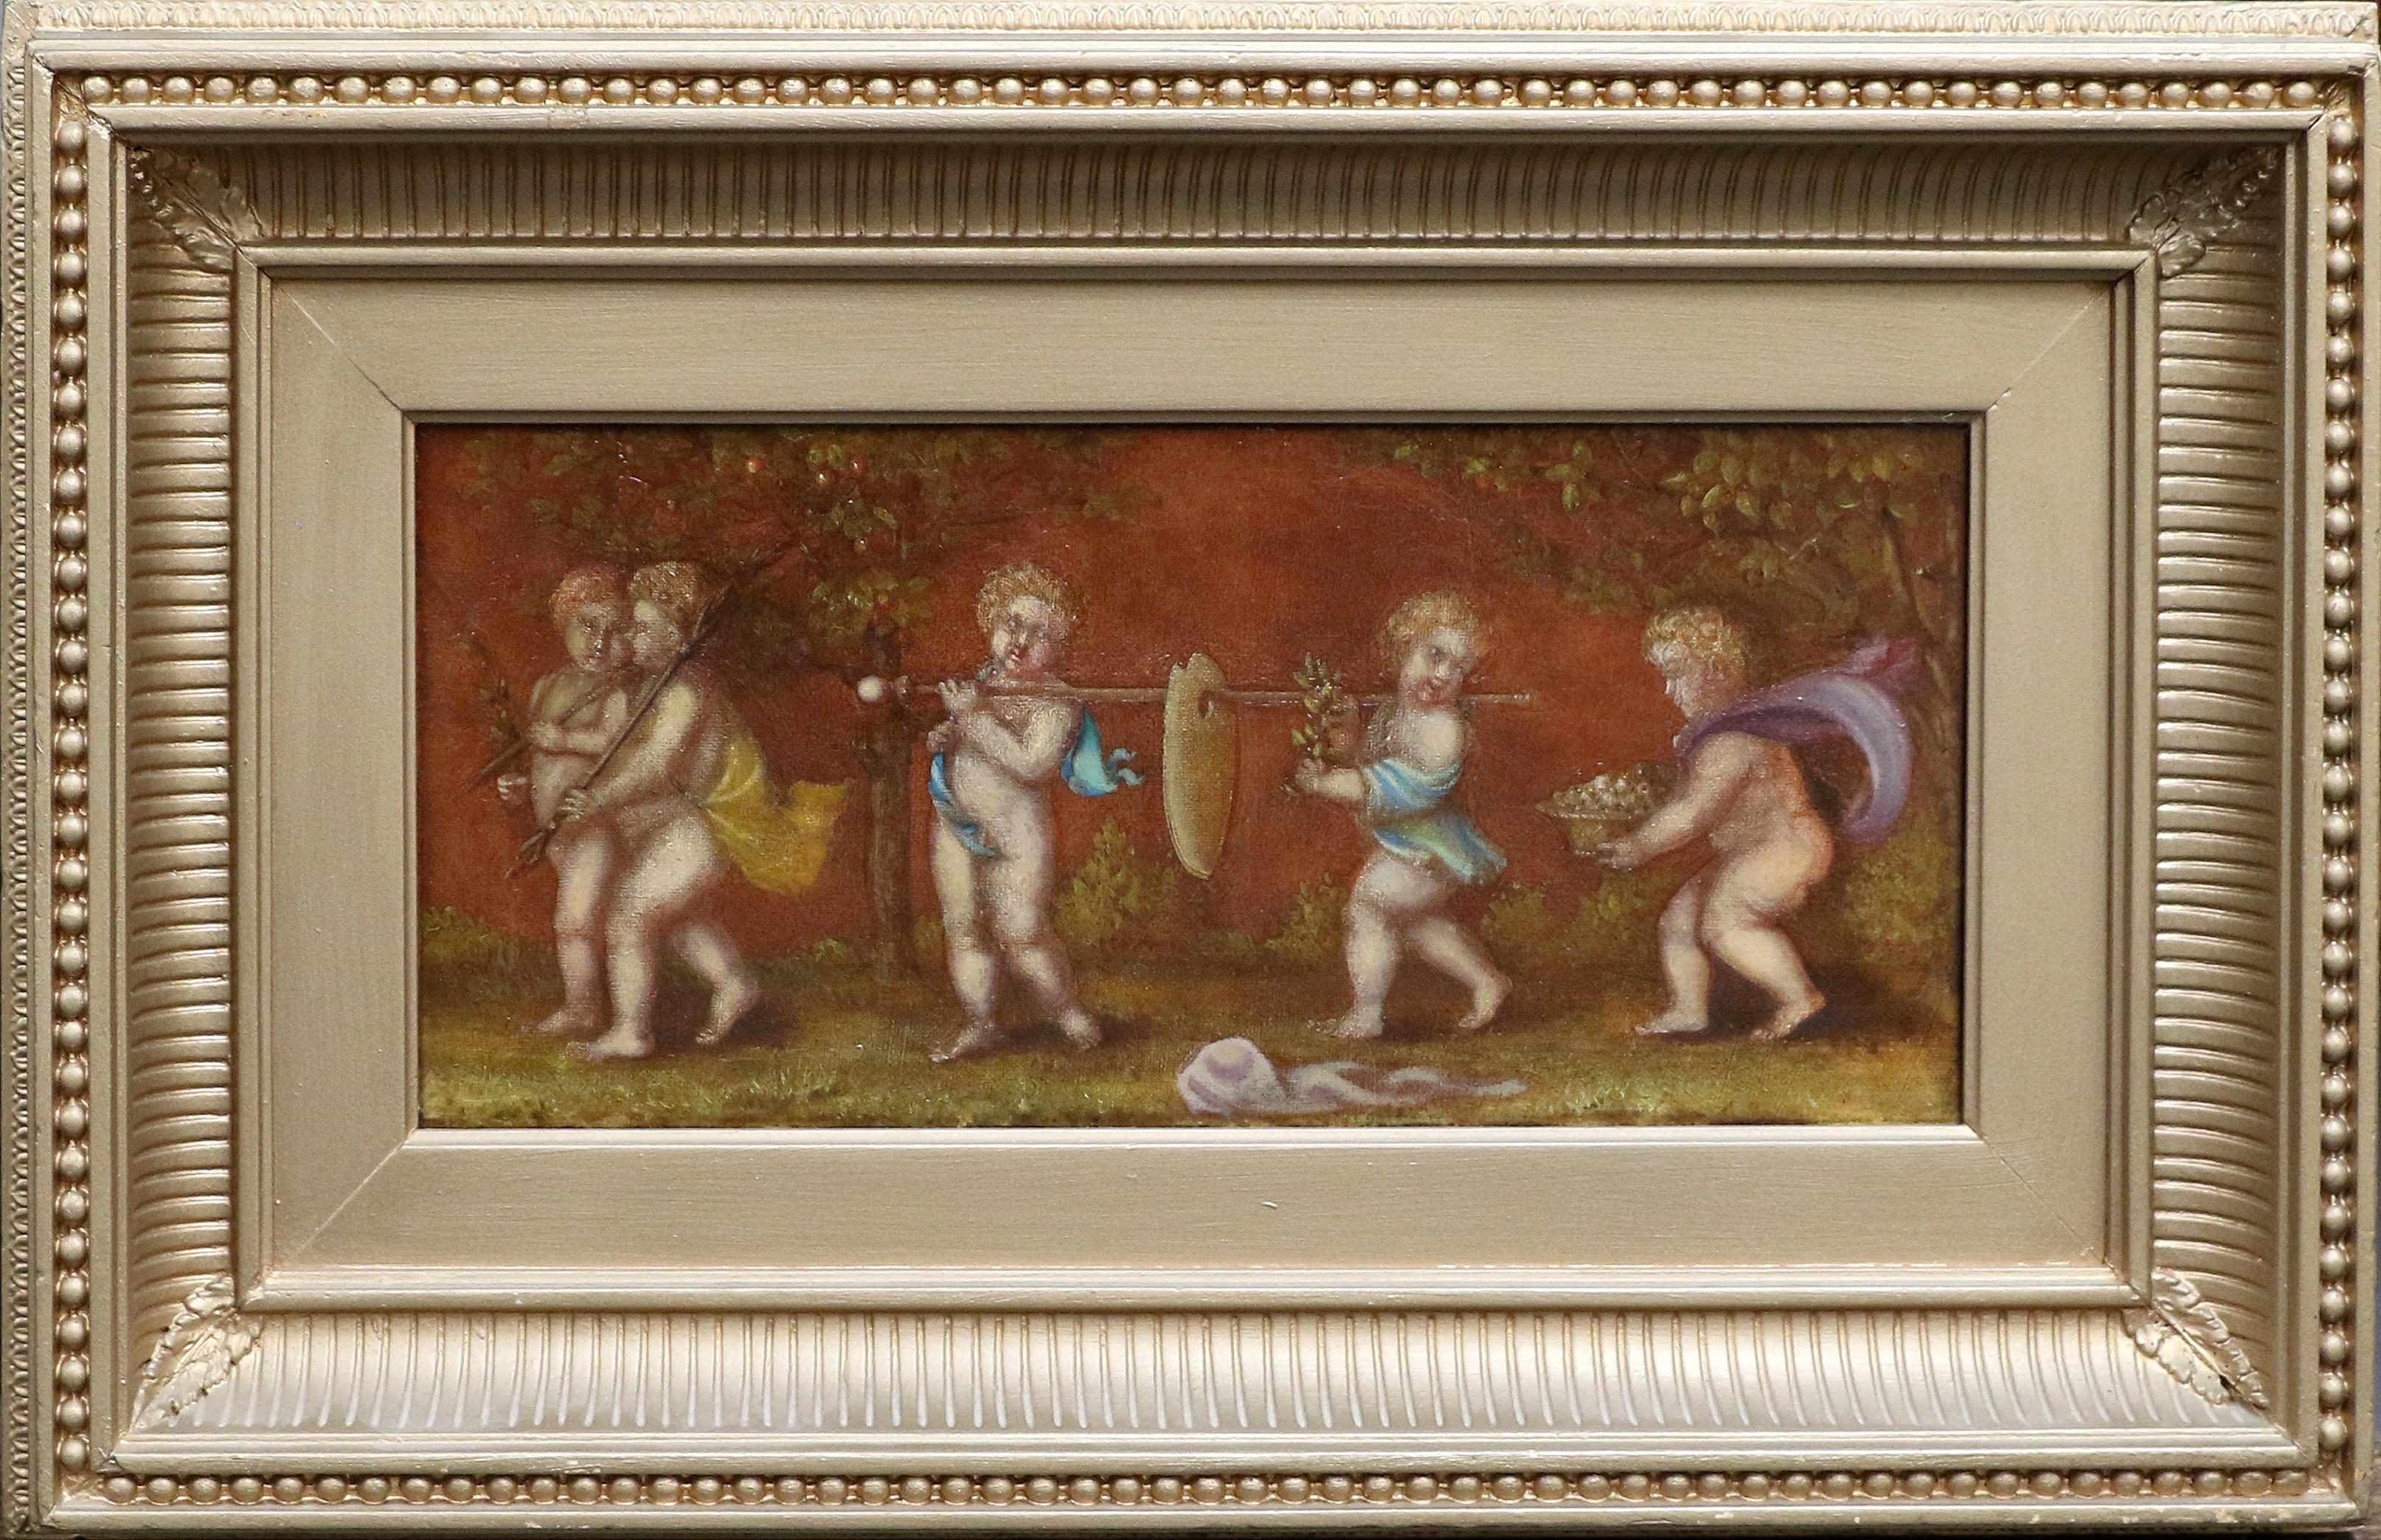 19th century Italian School Figurative Painting - Antique Italian Oil Painting Procession of Putti Cherubs Playfully with Flowers